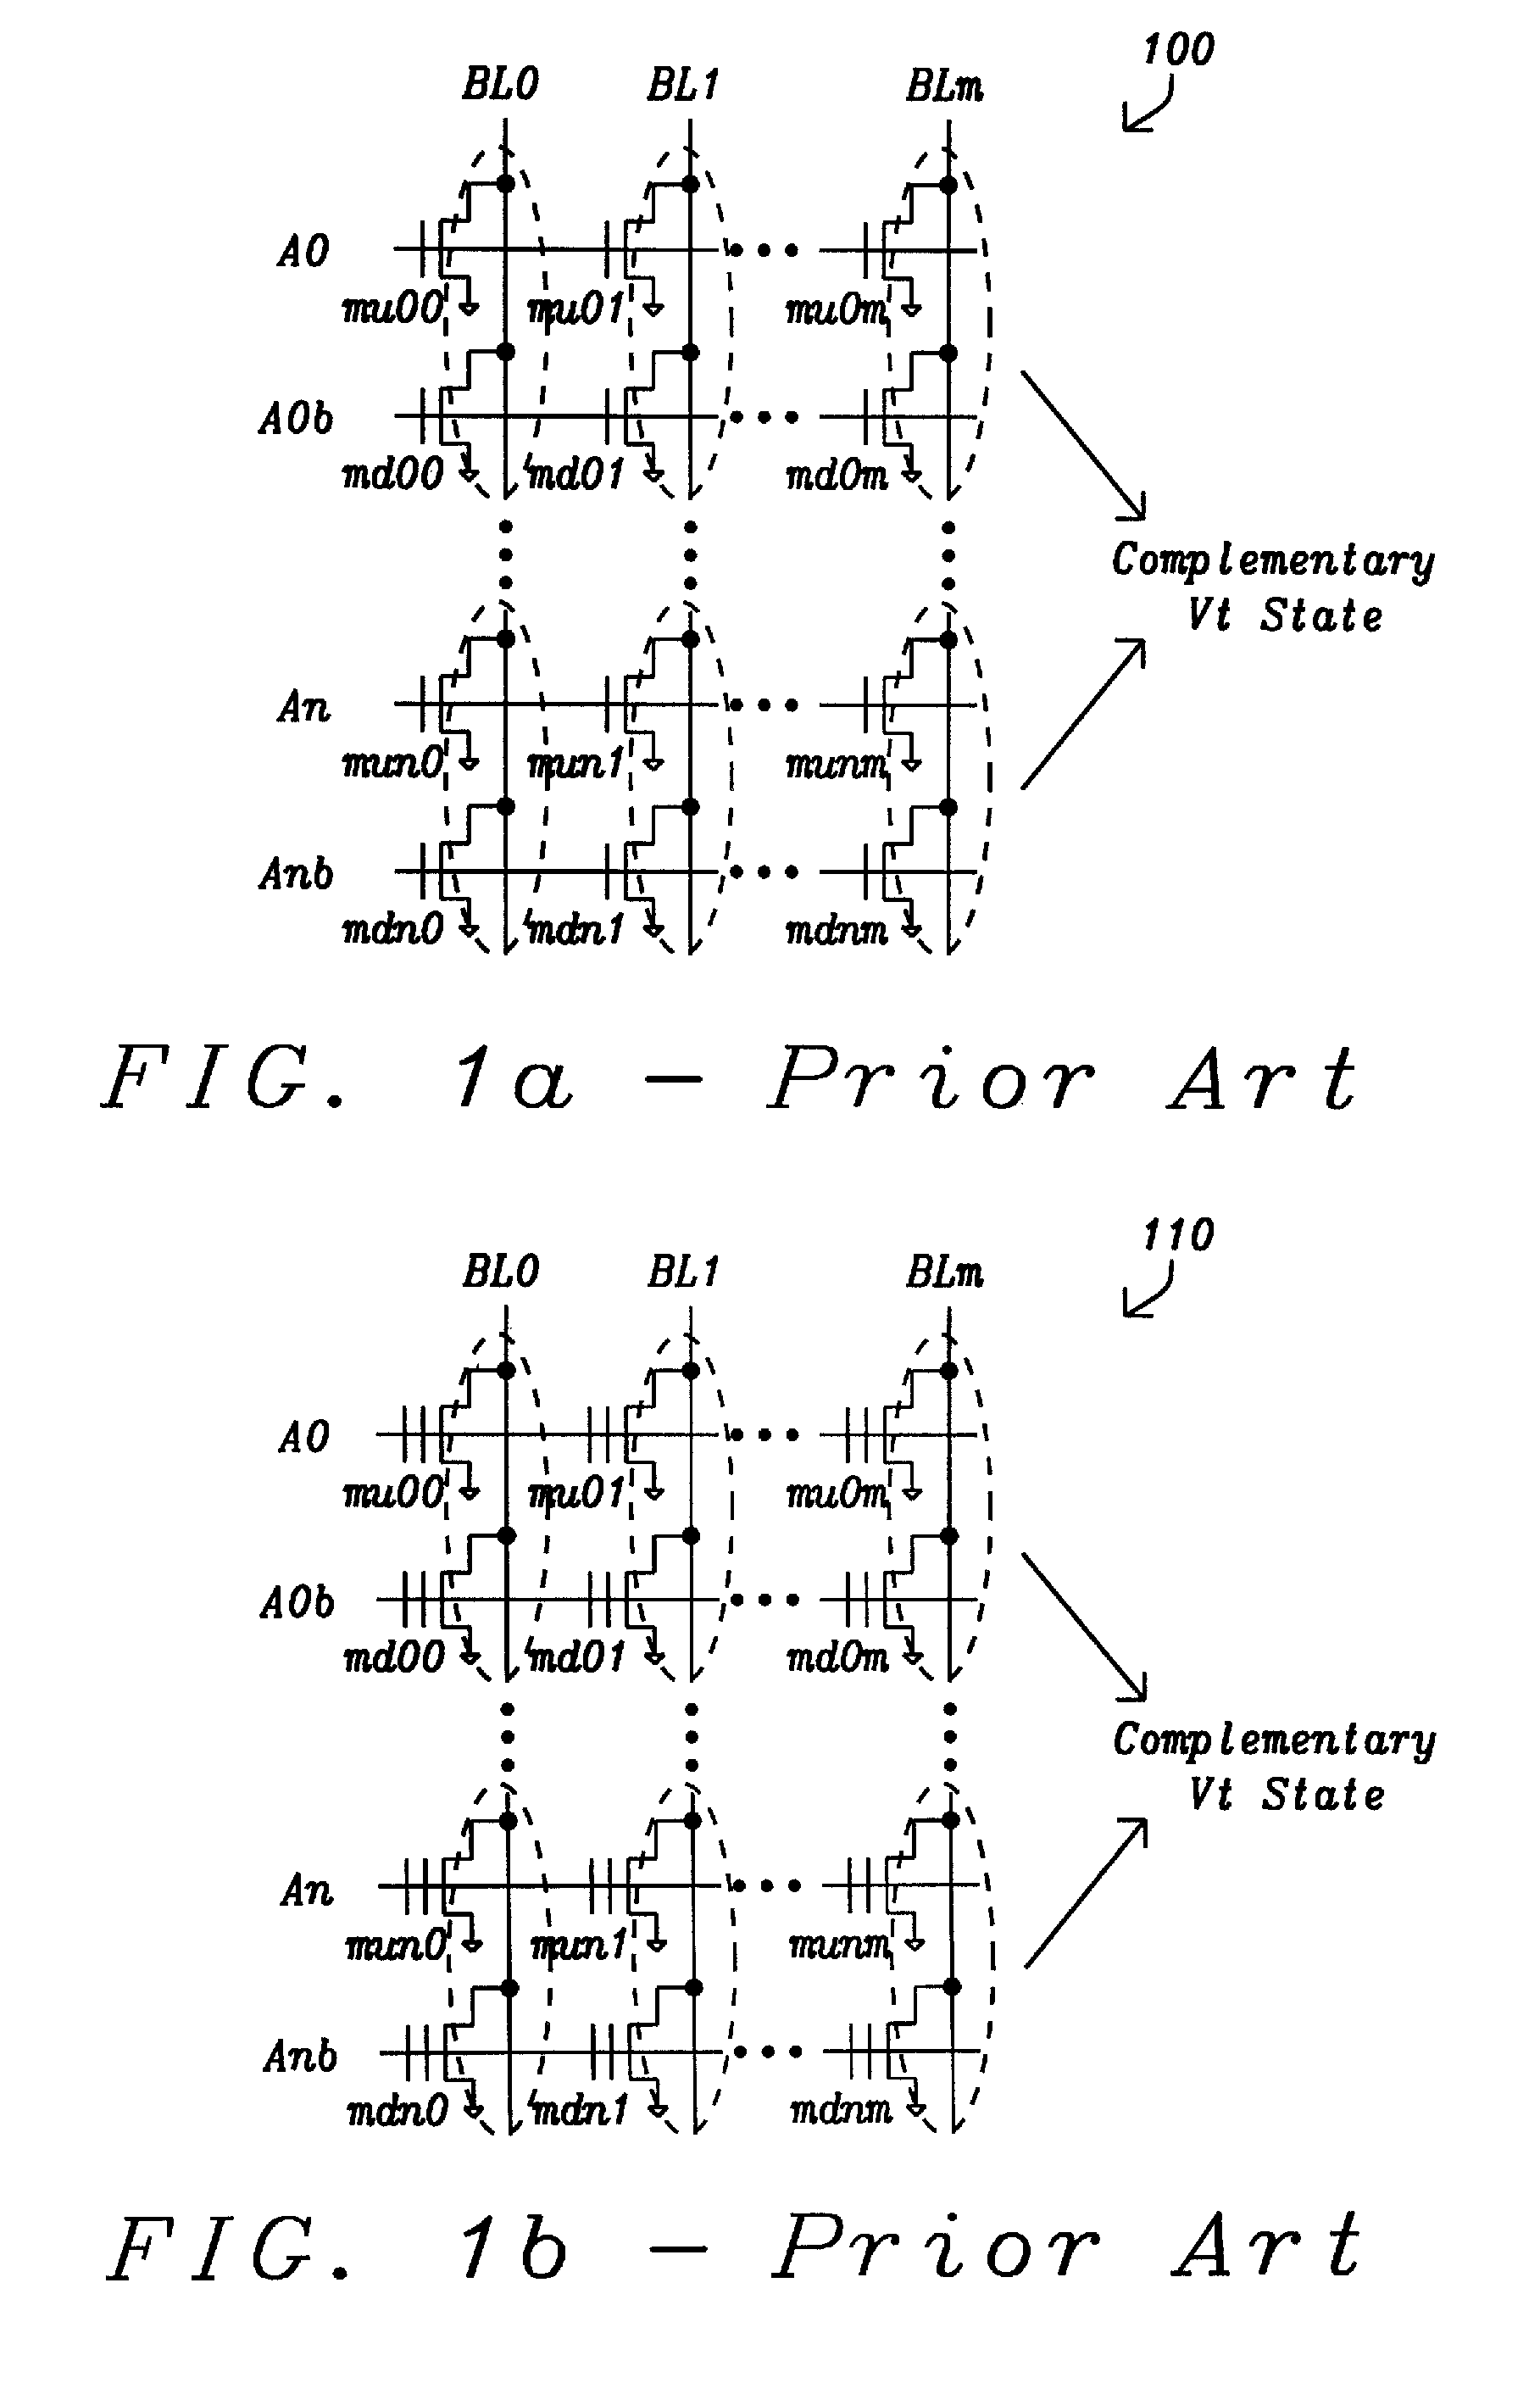 Flexible 2T-based fuzzy and certain matching arrays